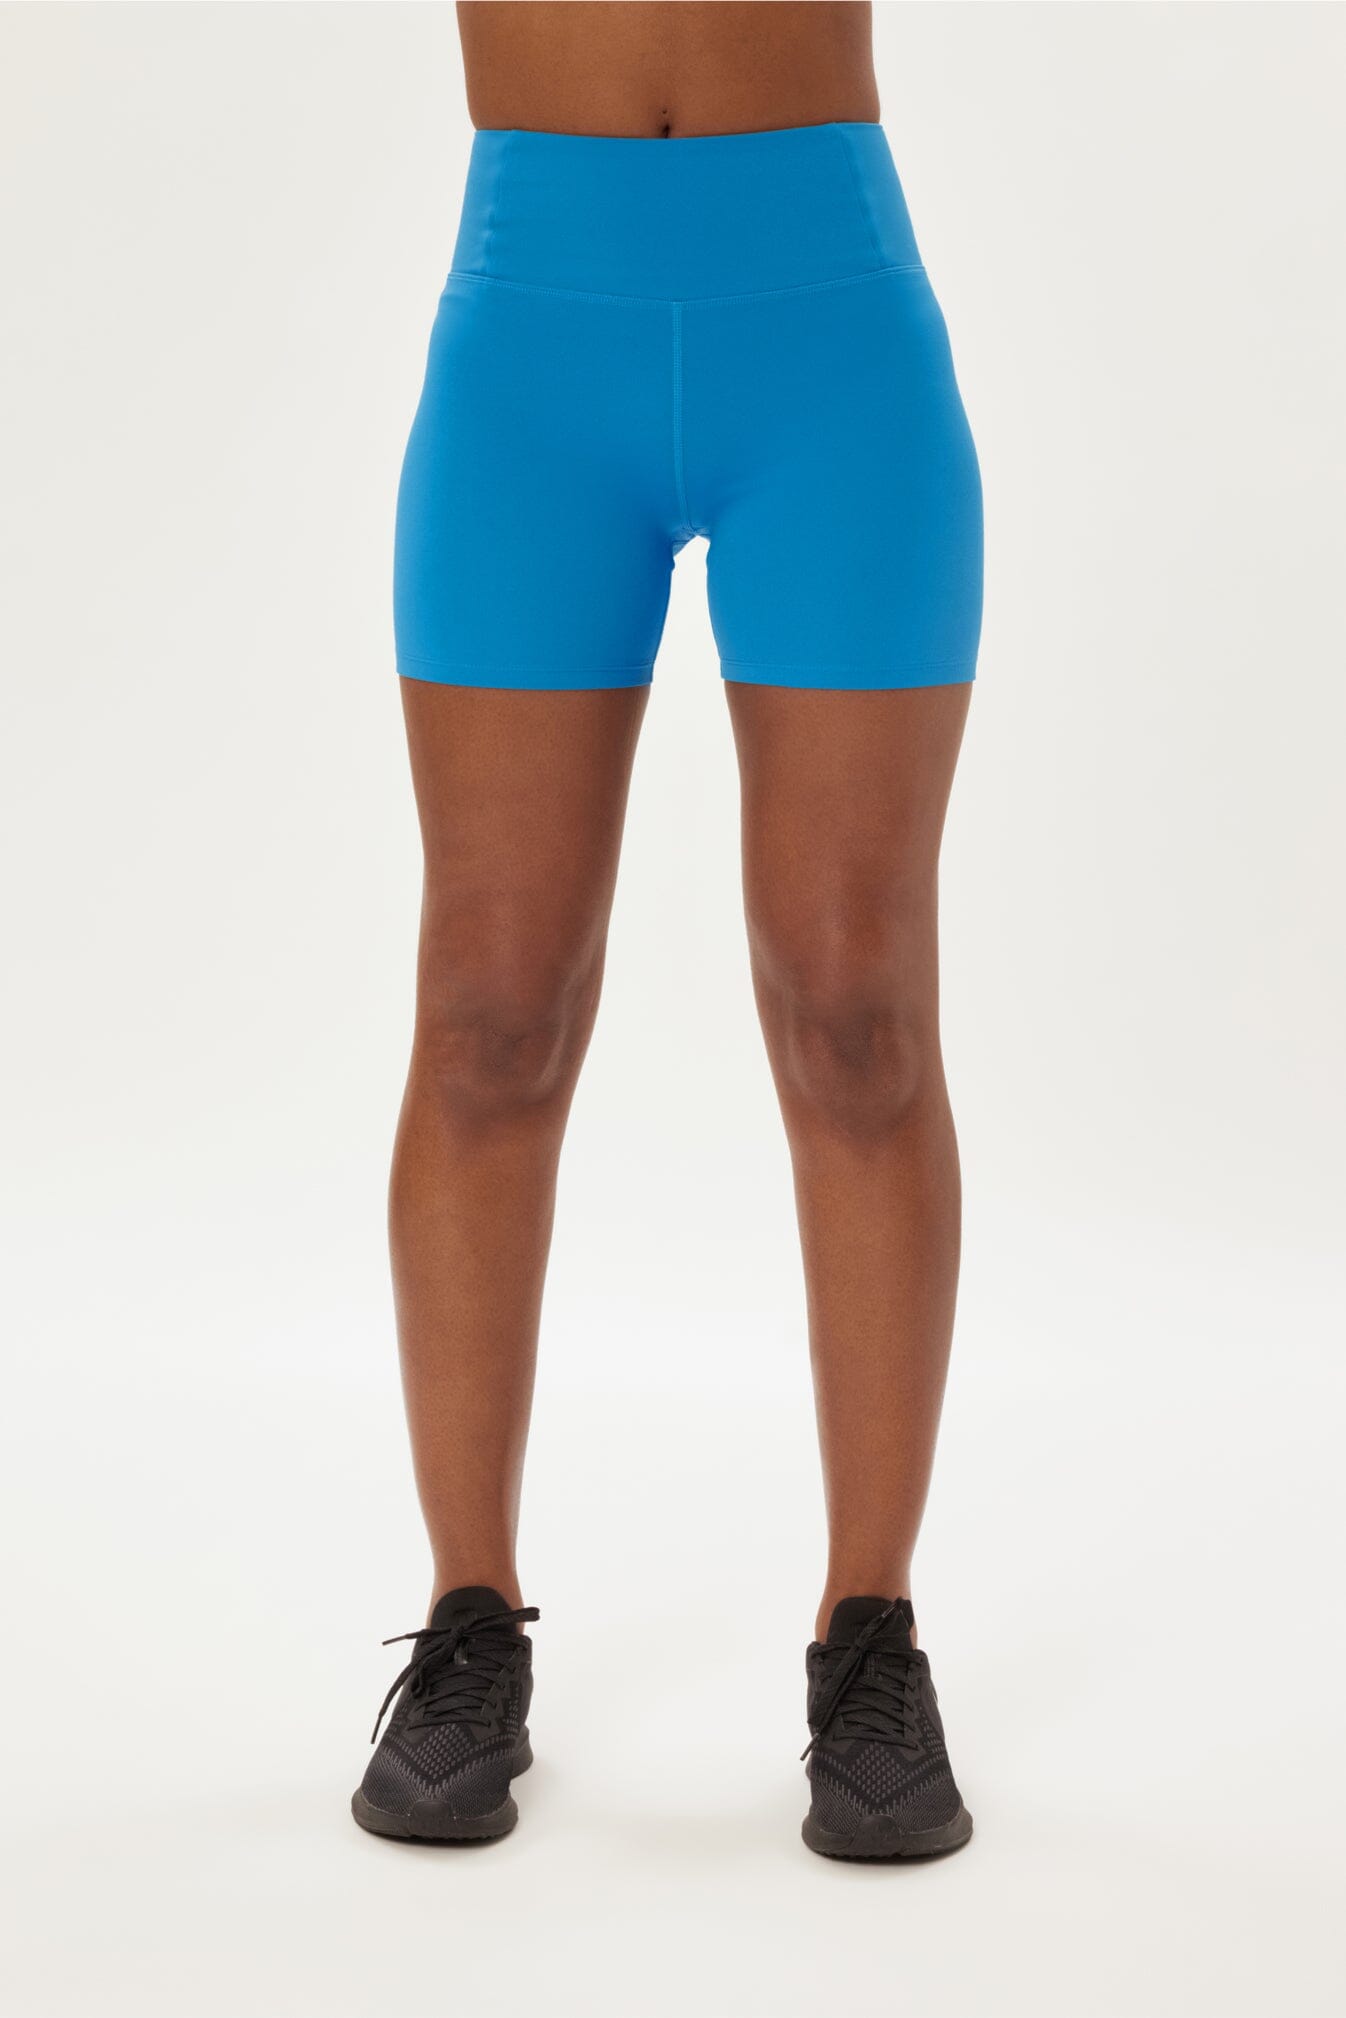 Girlfriend Collective - Float Ultralight Run Shorts - Recycled RPET - Weekendbee - sustainable sportswear